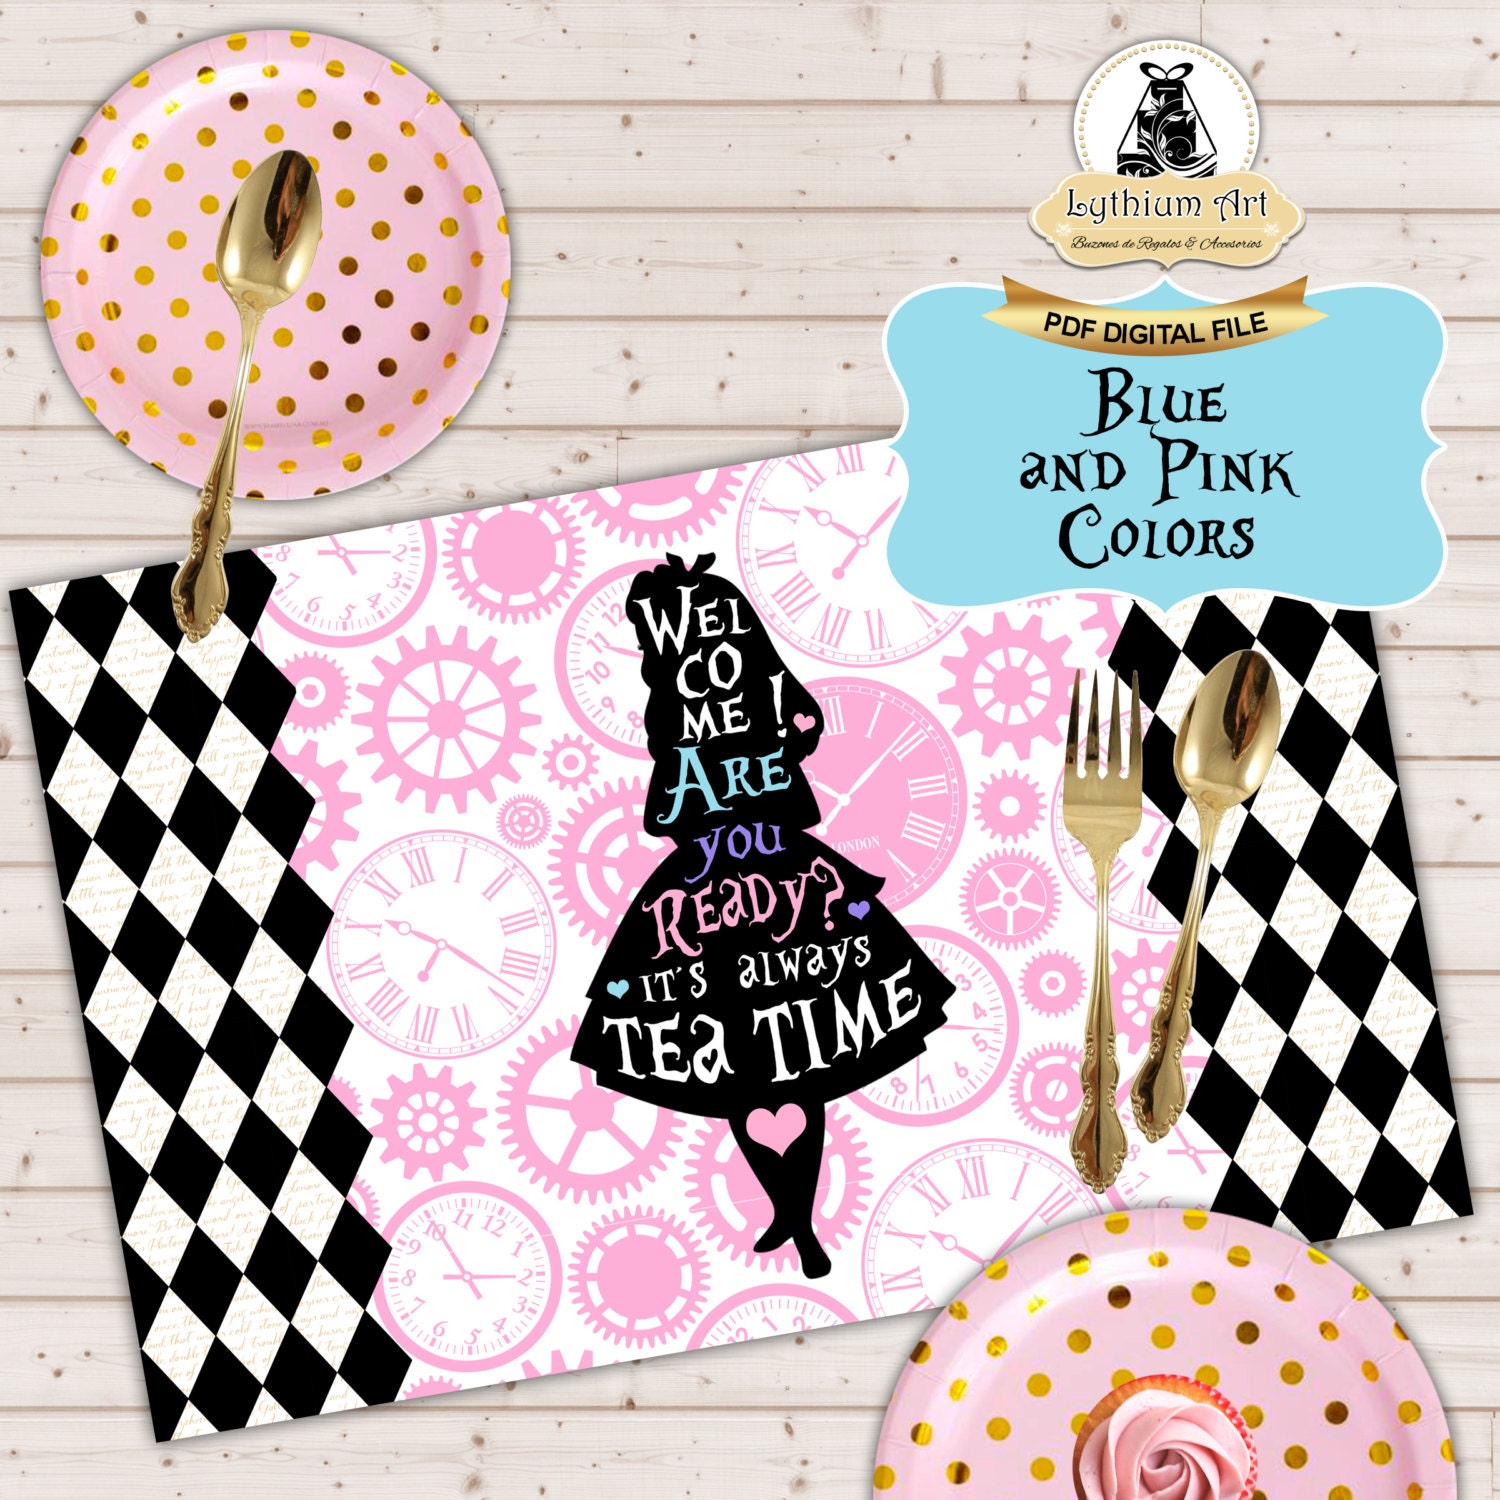 Alice in Wonderland Decorations Party Bunting Alice in Wonderland Party  Supplies Tea Party Garden Party Birthday Printables 